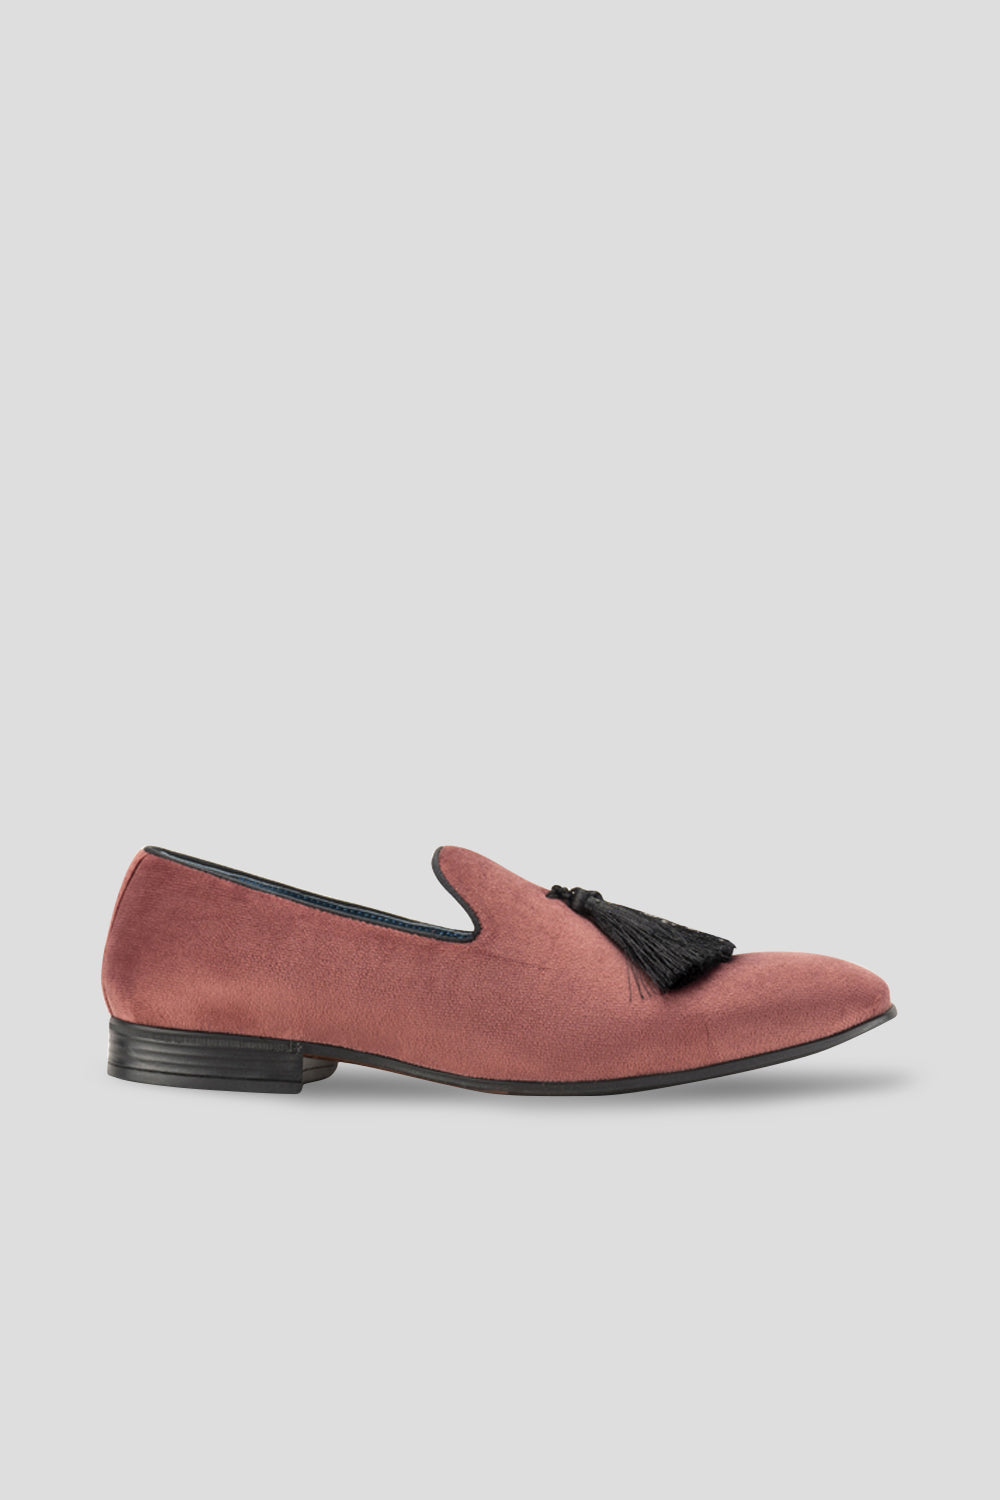 Jacob Mens Slippers in salmon pink colour with black tassel from Oswin Hyde